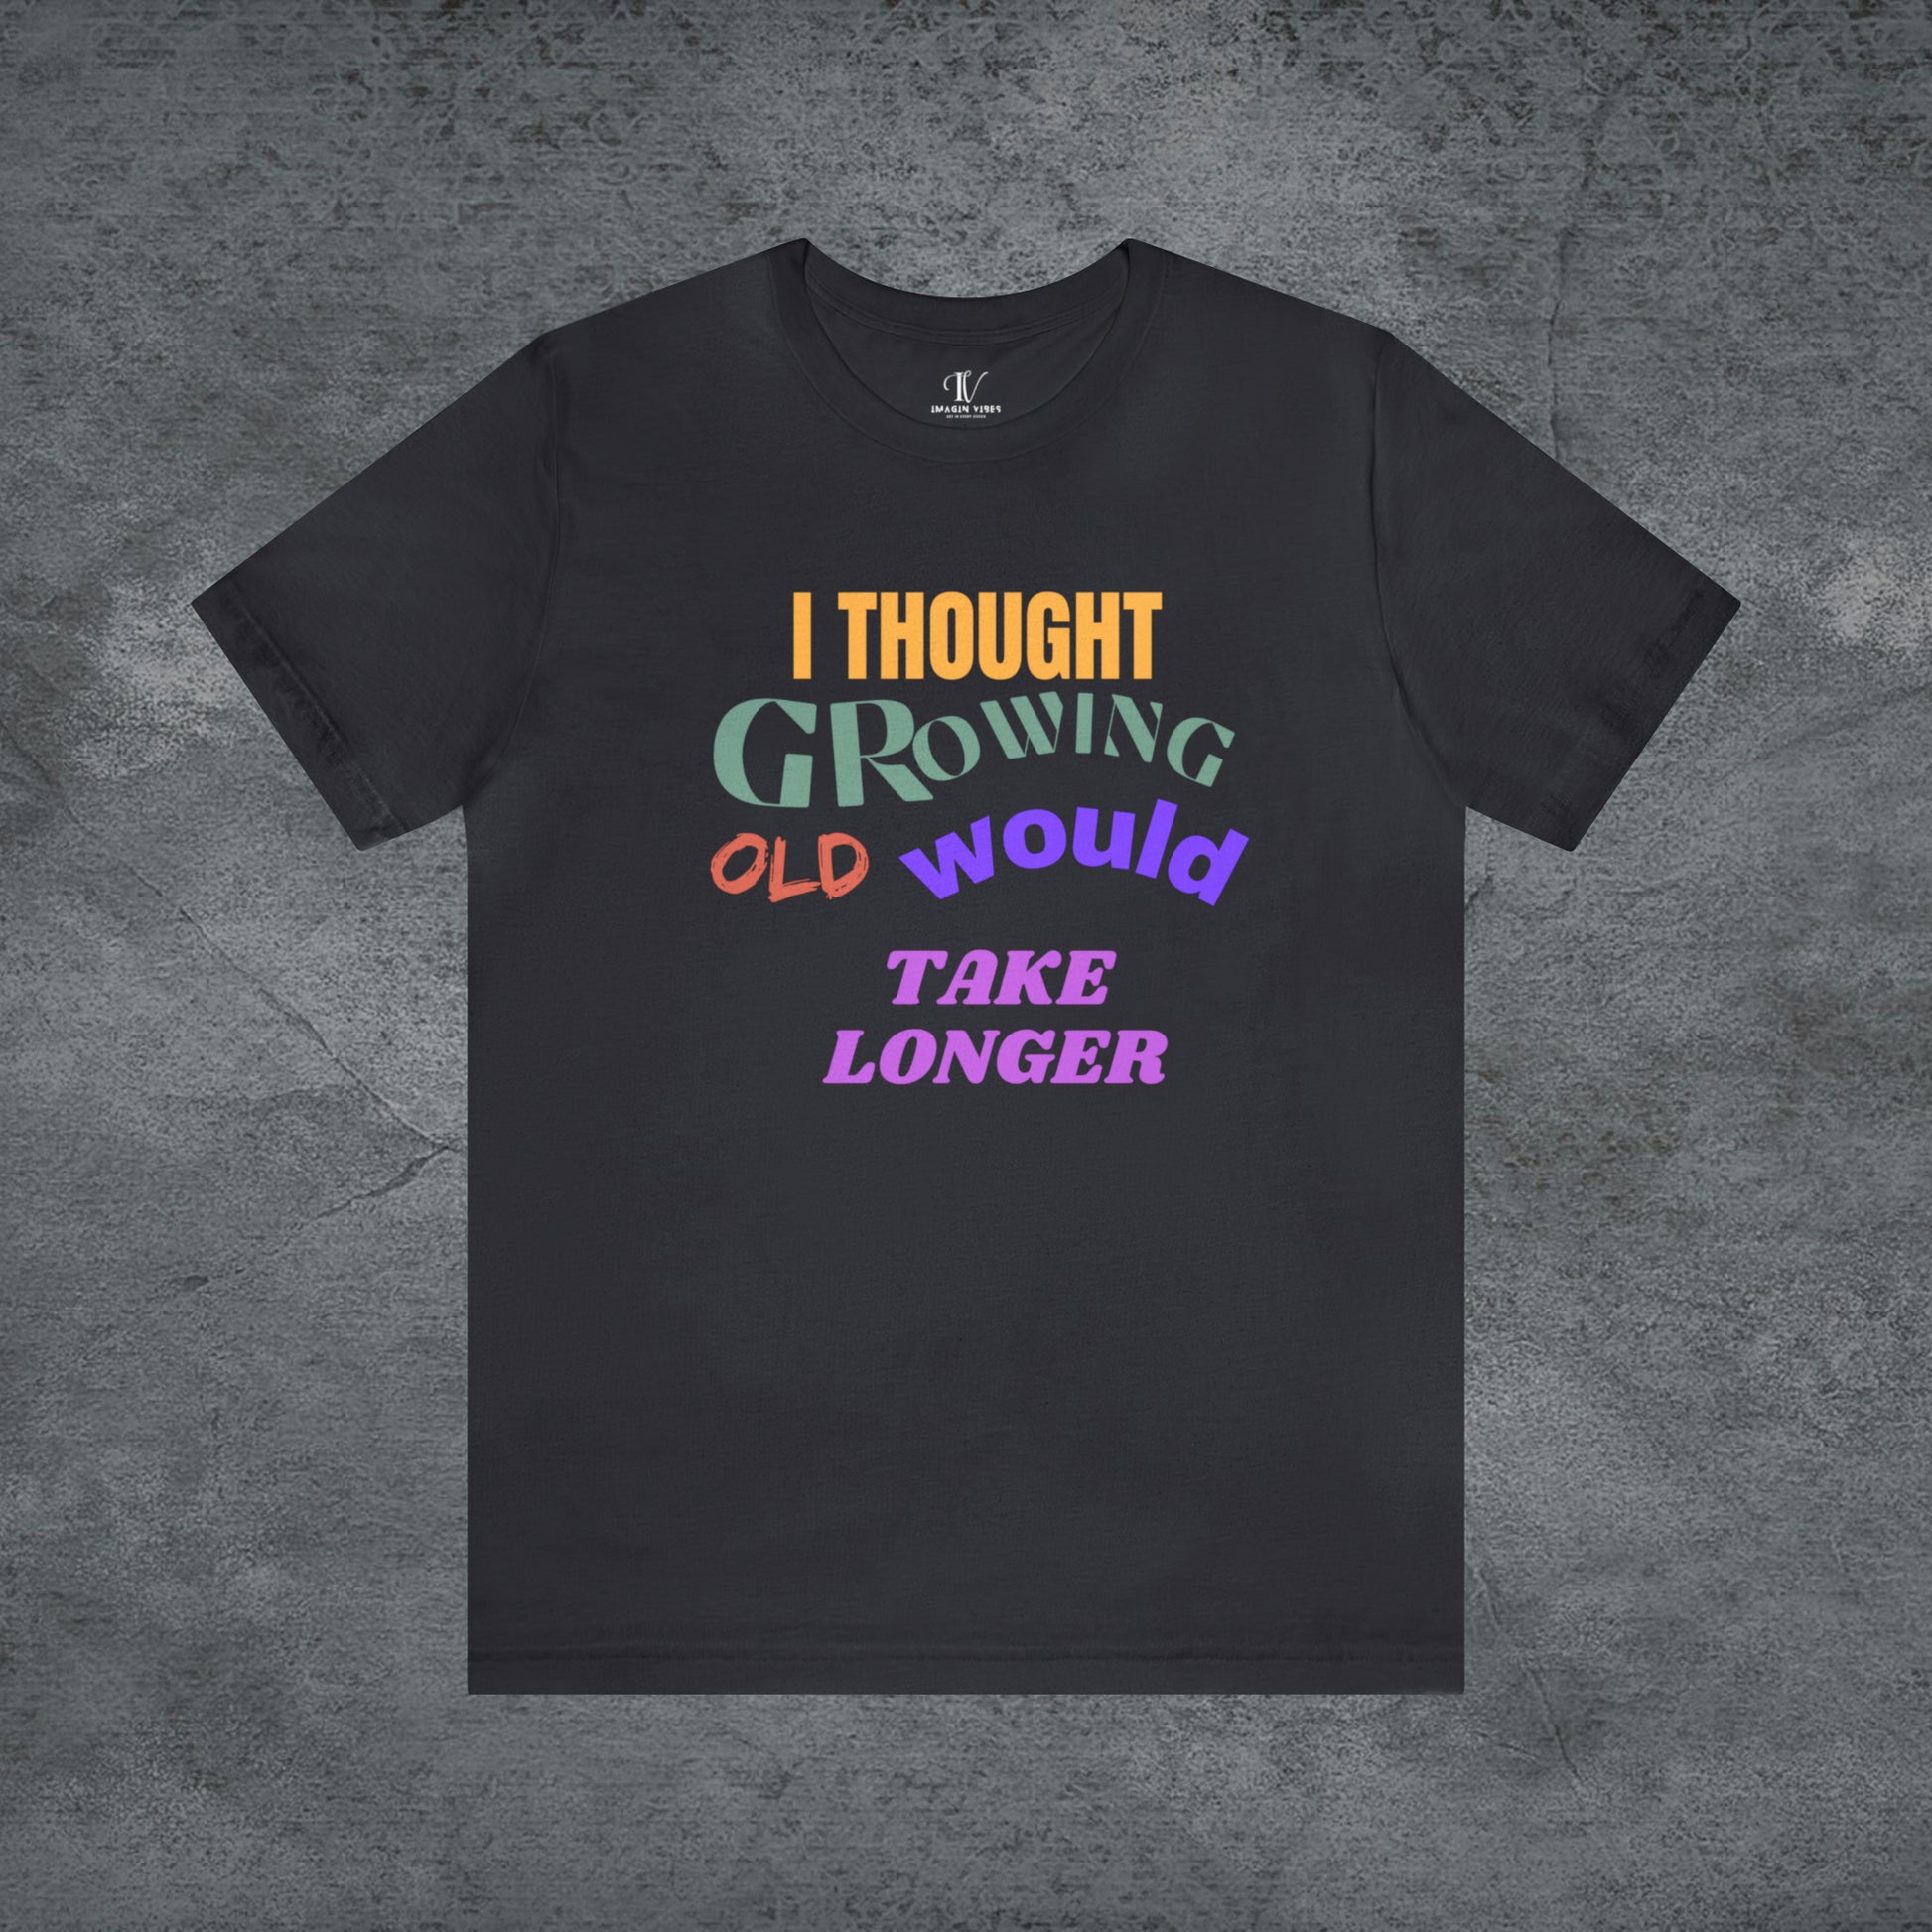 I Thought Growing Old Would Take Longer T-Shirt - Getting Older T-Shirt - Funny Adulting Tee - Old Age T-Shirt - Old Person T-Shirt T-Shirt Dark Grey S 